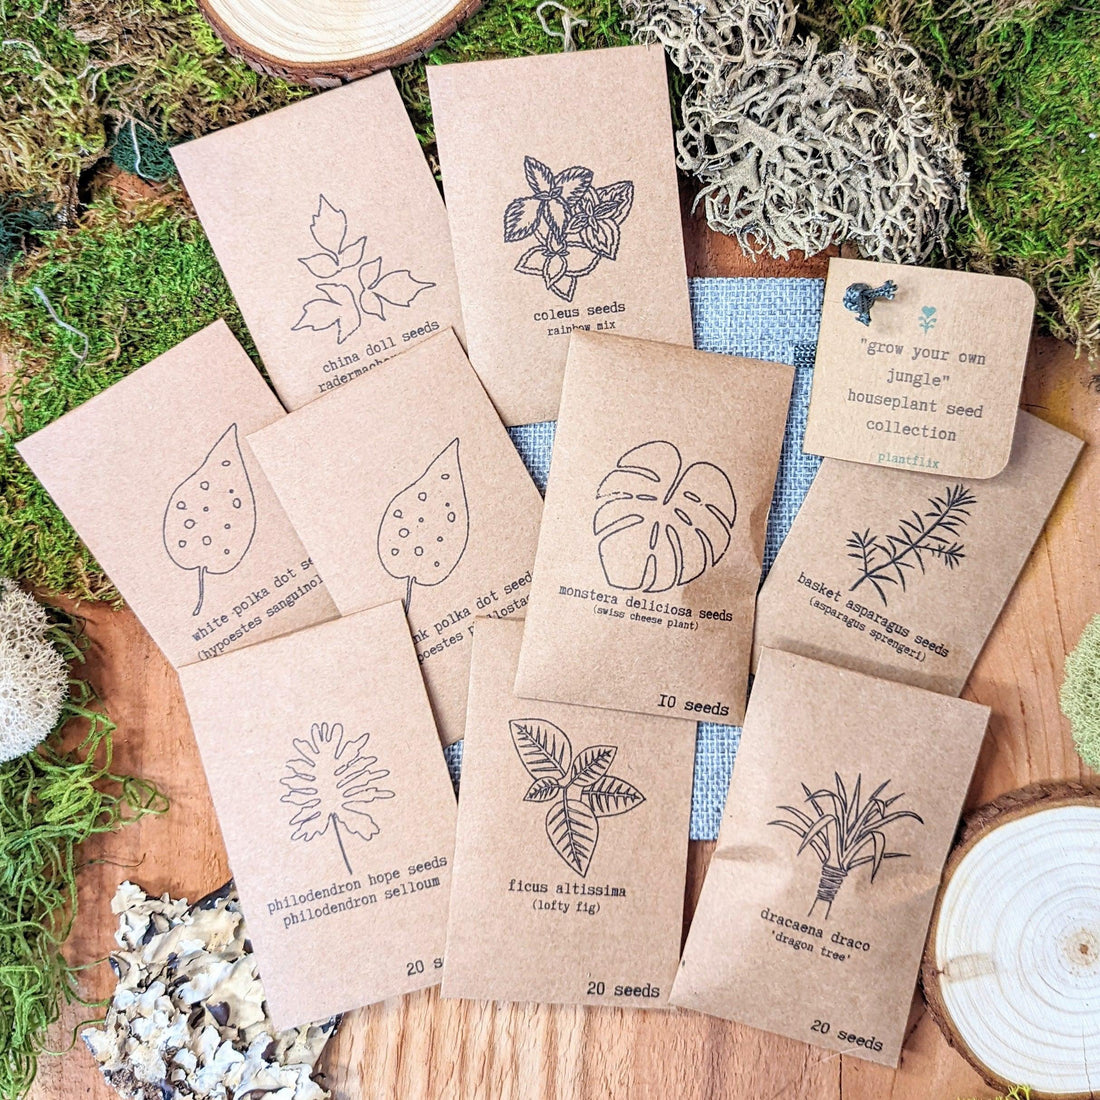 &quot;Grow your own Jungle&quot; Houseplant Seed Collection - Plantflix